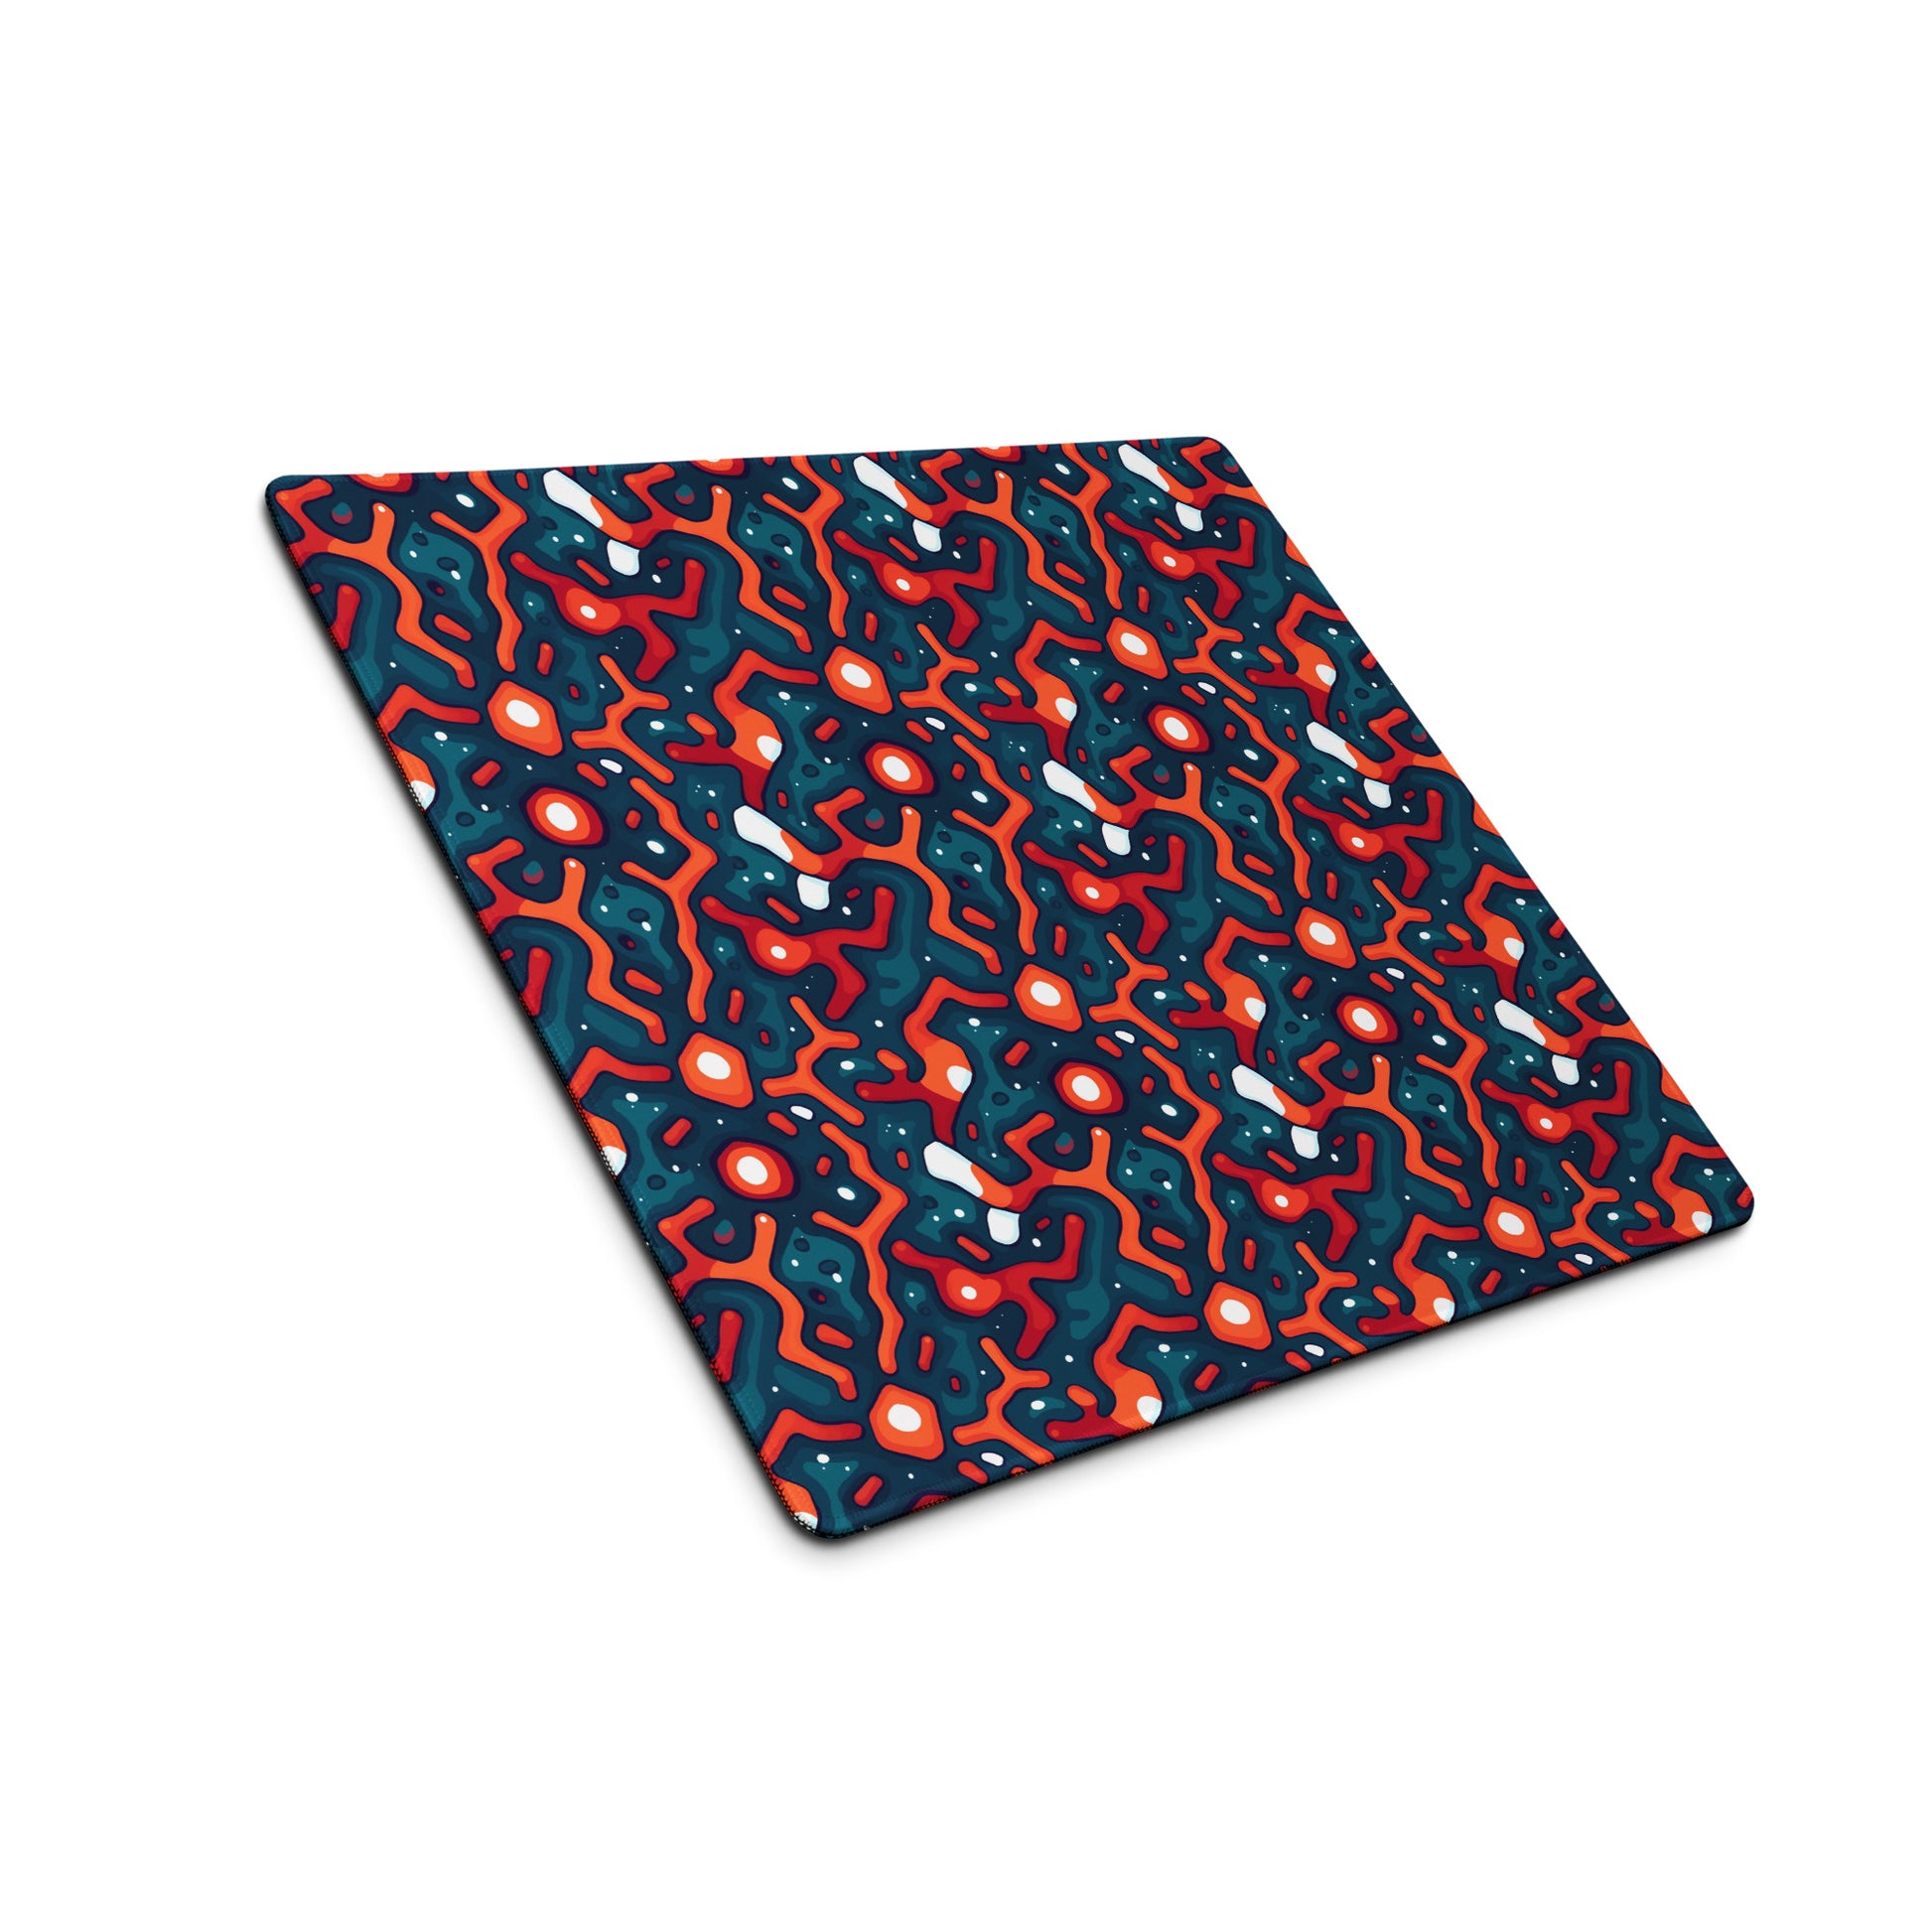 A 18" x 16" desk pad with a blue and orange crack pattern sitting at an angle.